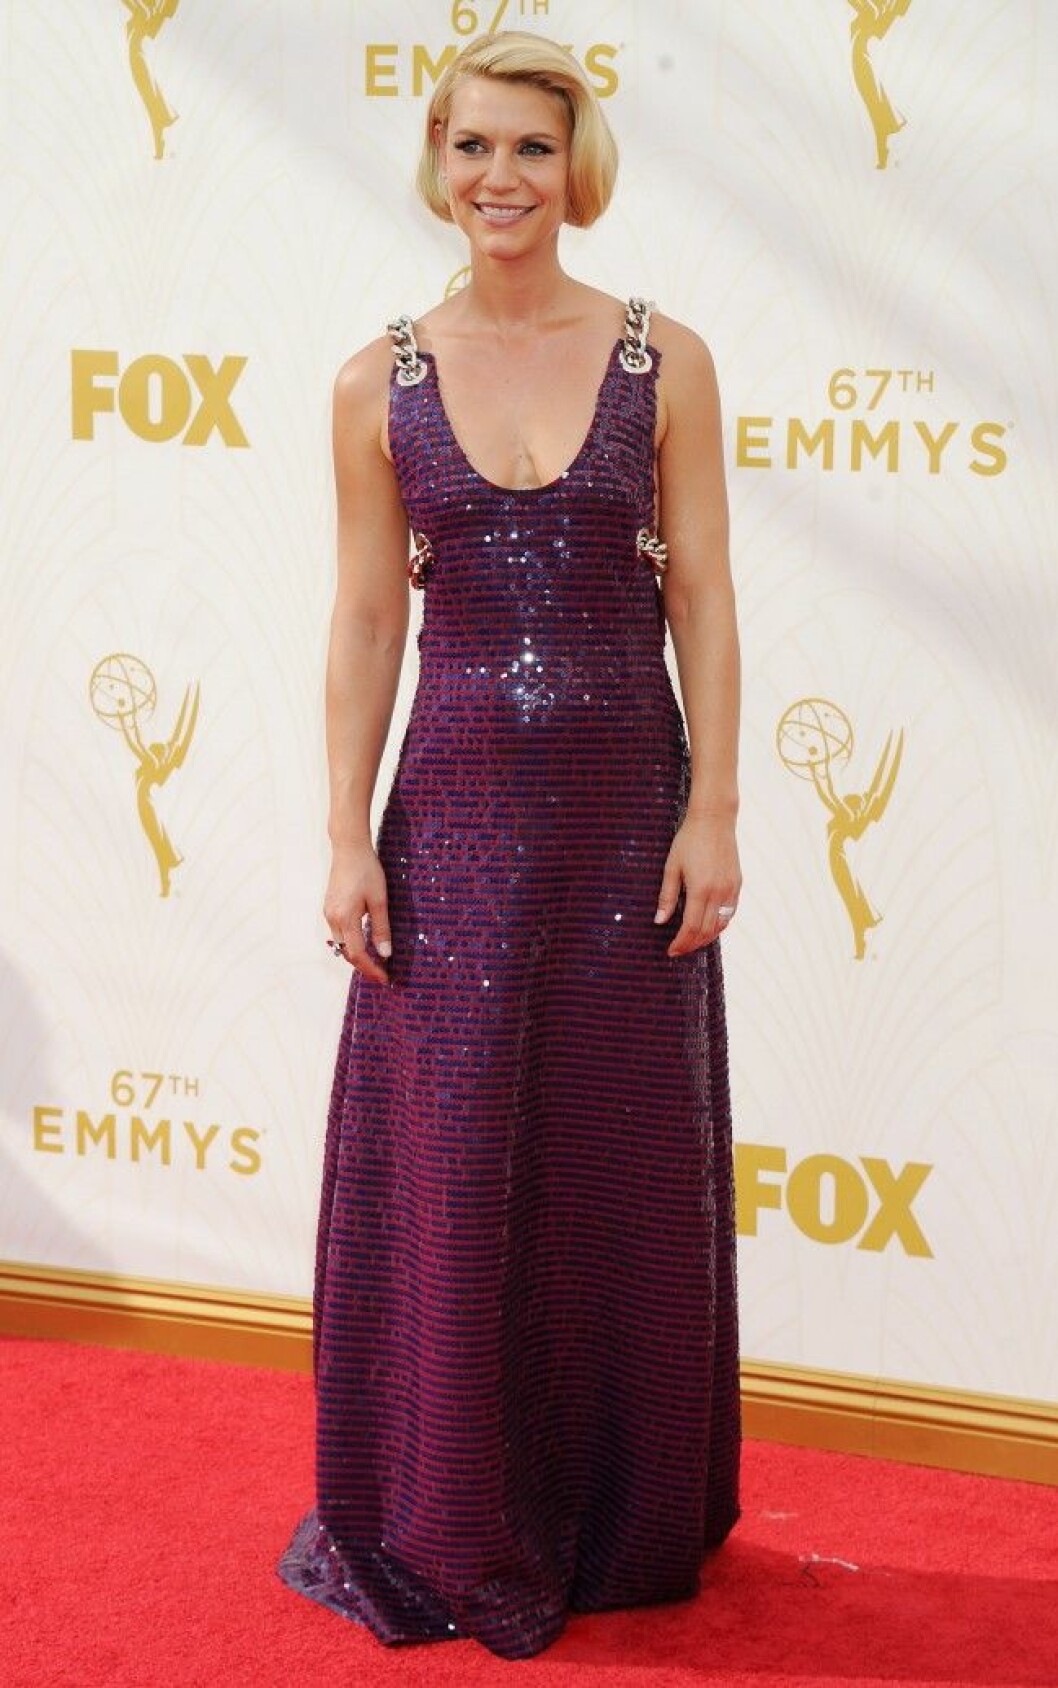 NO JUST JARED USAGE 67th Annual Primetime Emmy Awards Pictured: Claire Danes Ref: SPL1132556 200915 Picture by: Splash News Splash News and Pictures Los Angeles:310-821-2666 New York: 212-619-2666 London: 870-934-2666 photodesk@splashnews.com 